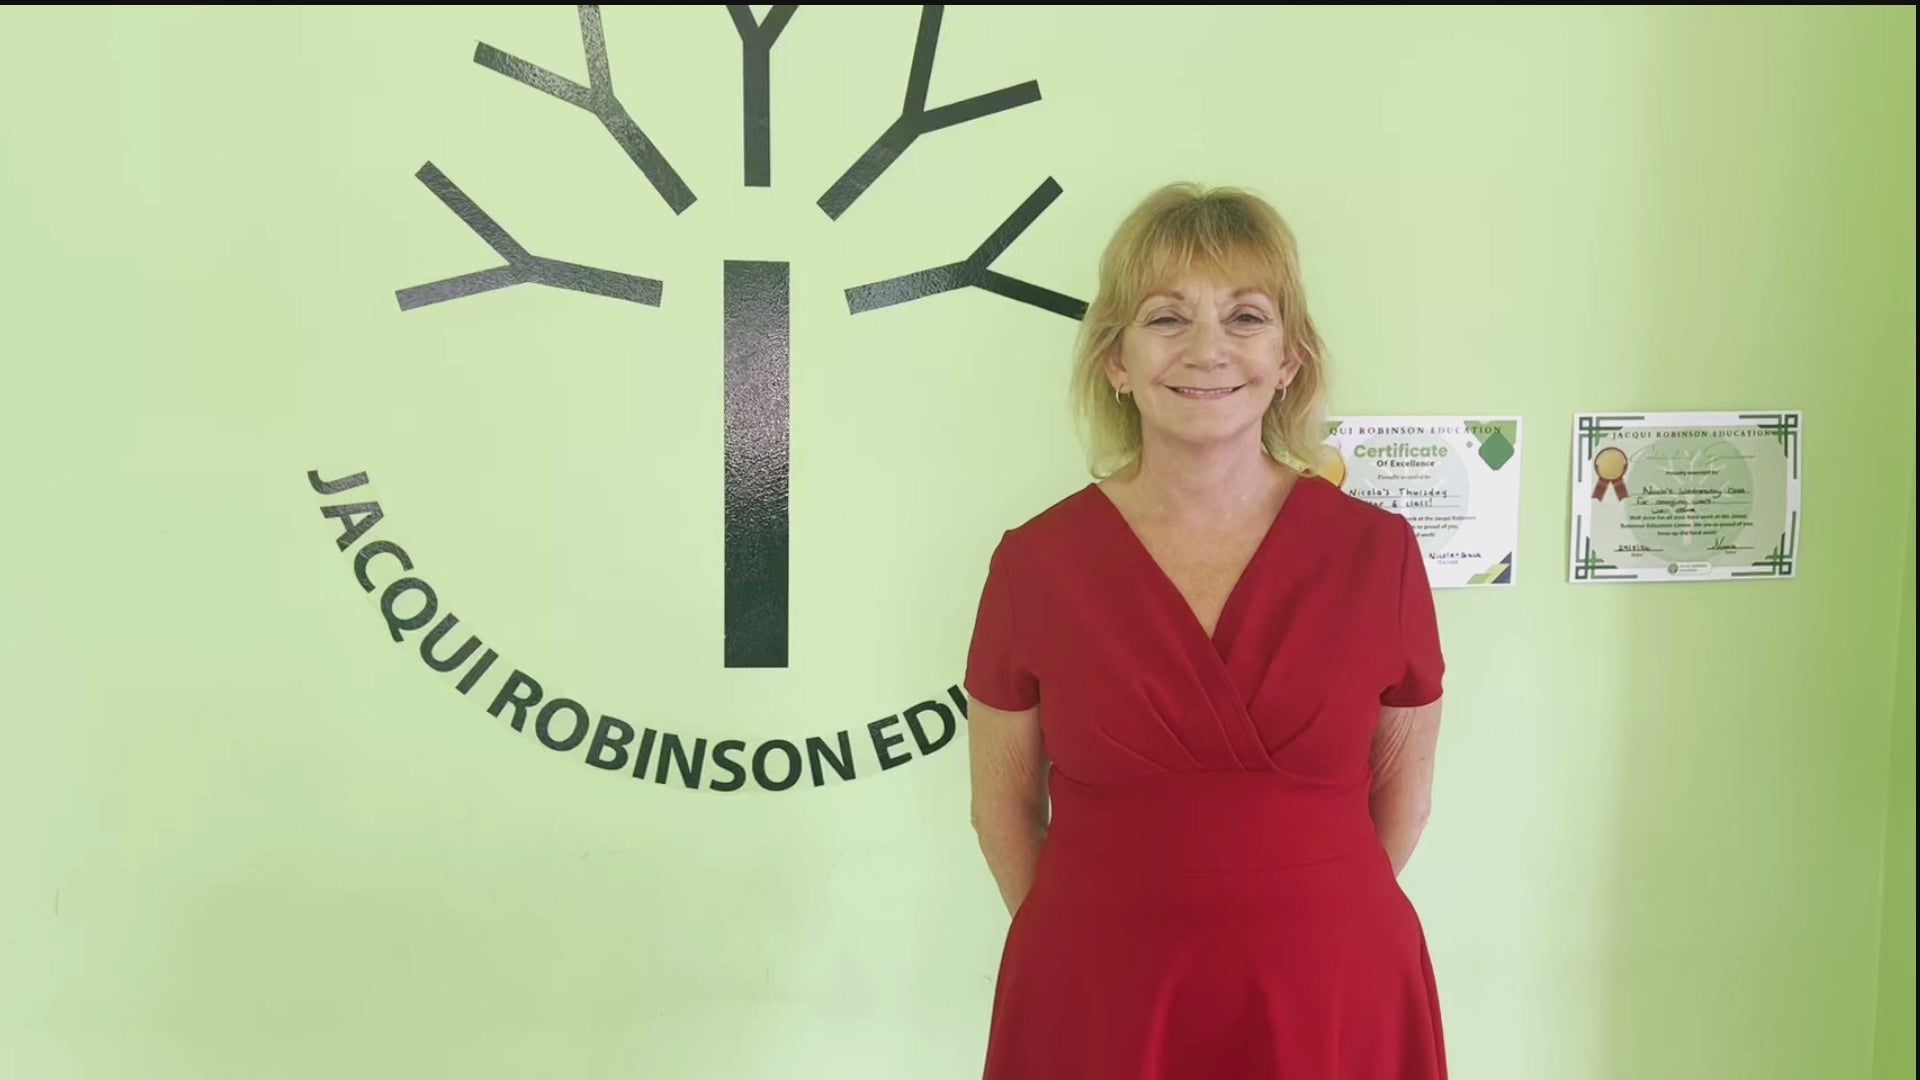 Year 2 Maths And English Tuition in jacqui robinson education